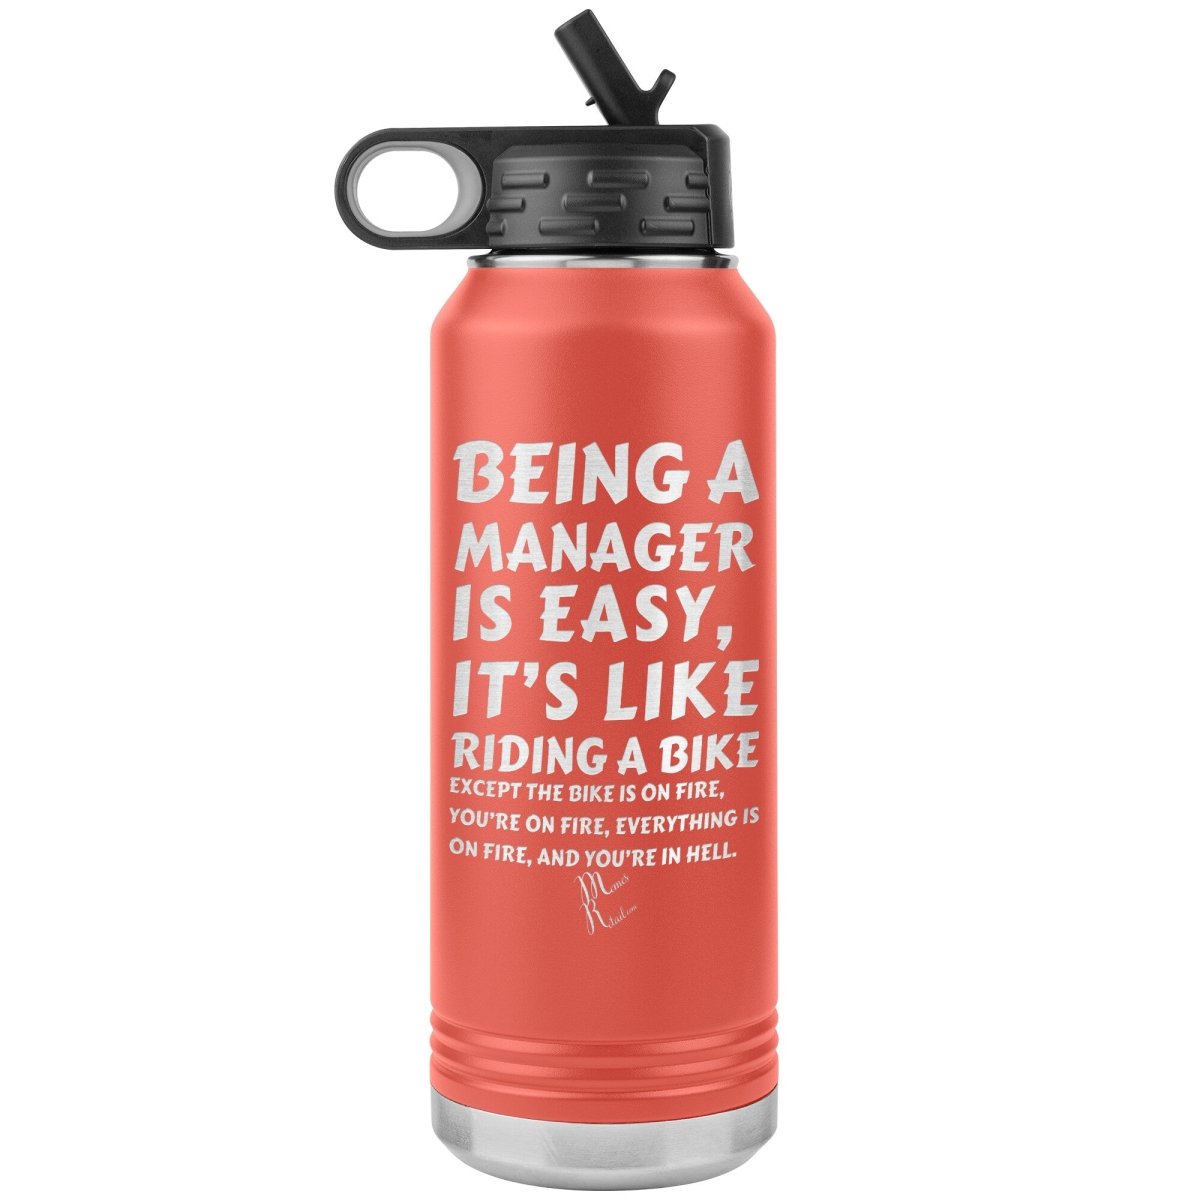 Being a manager is easy….32oz Water Tumbler, Coral - MemesRetail.com